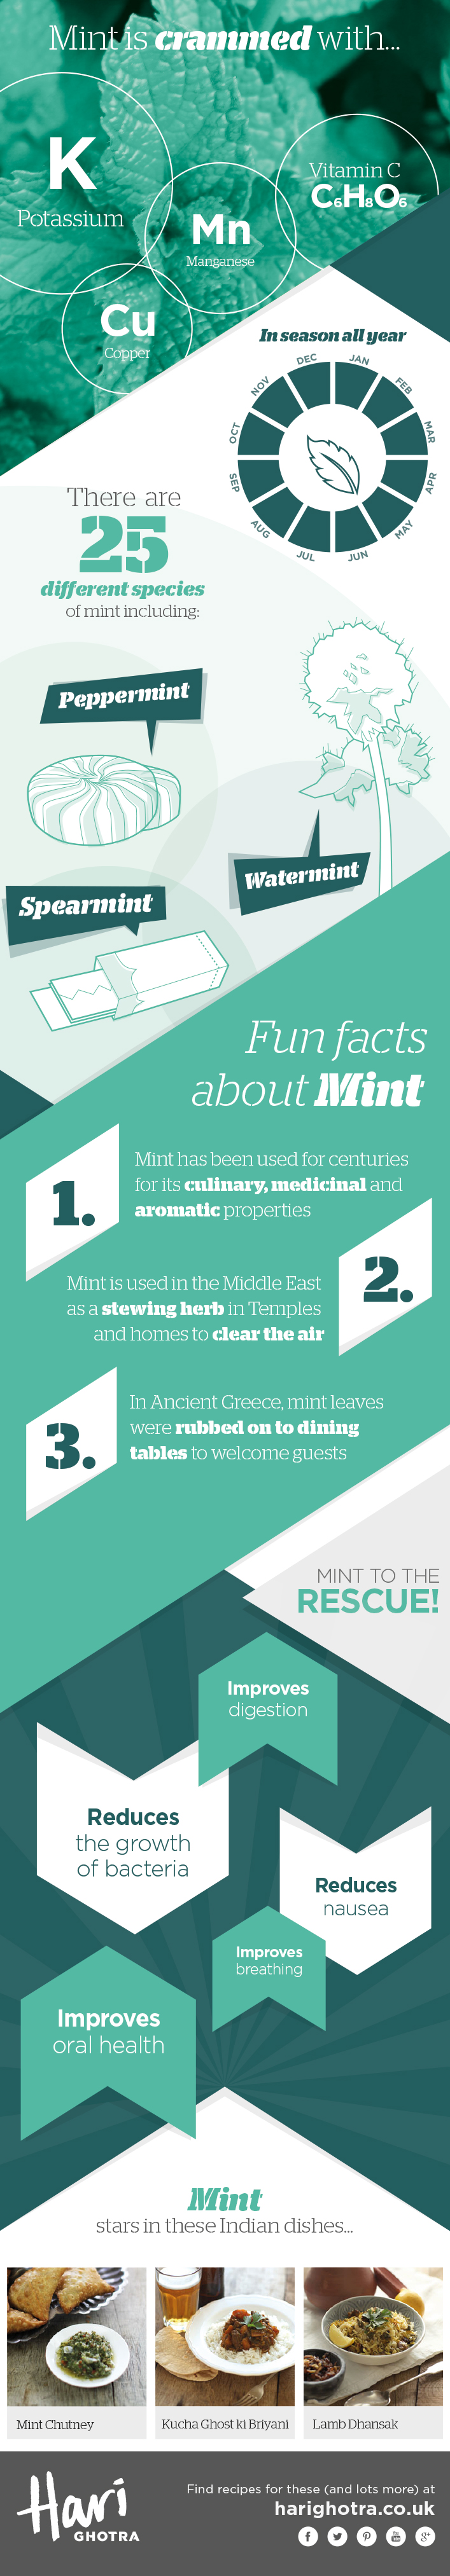 Mint Infographic showing the health benefits of Mint